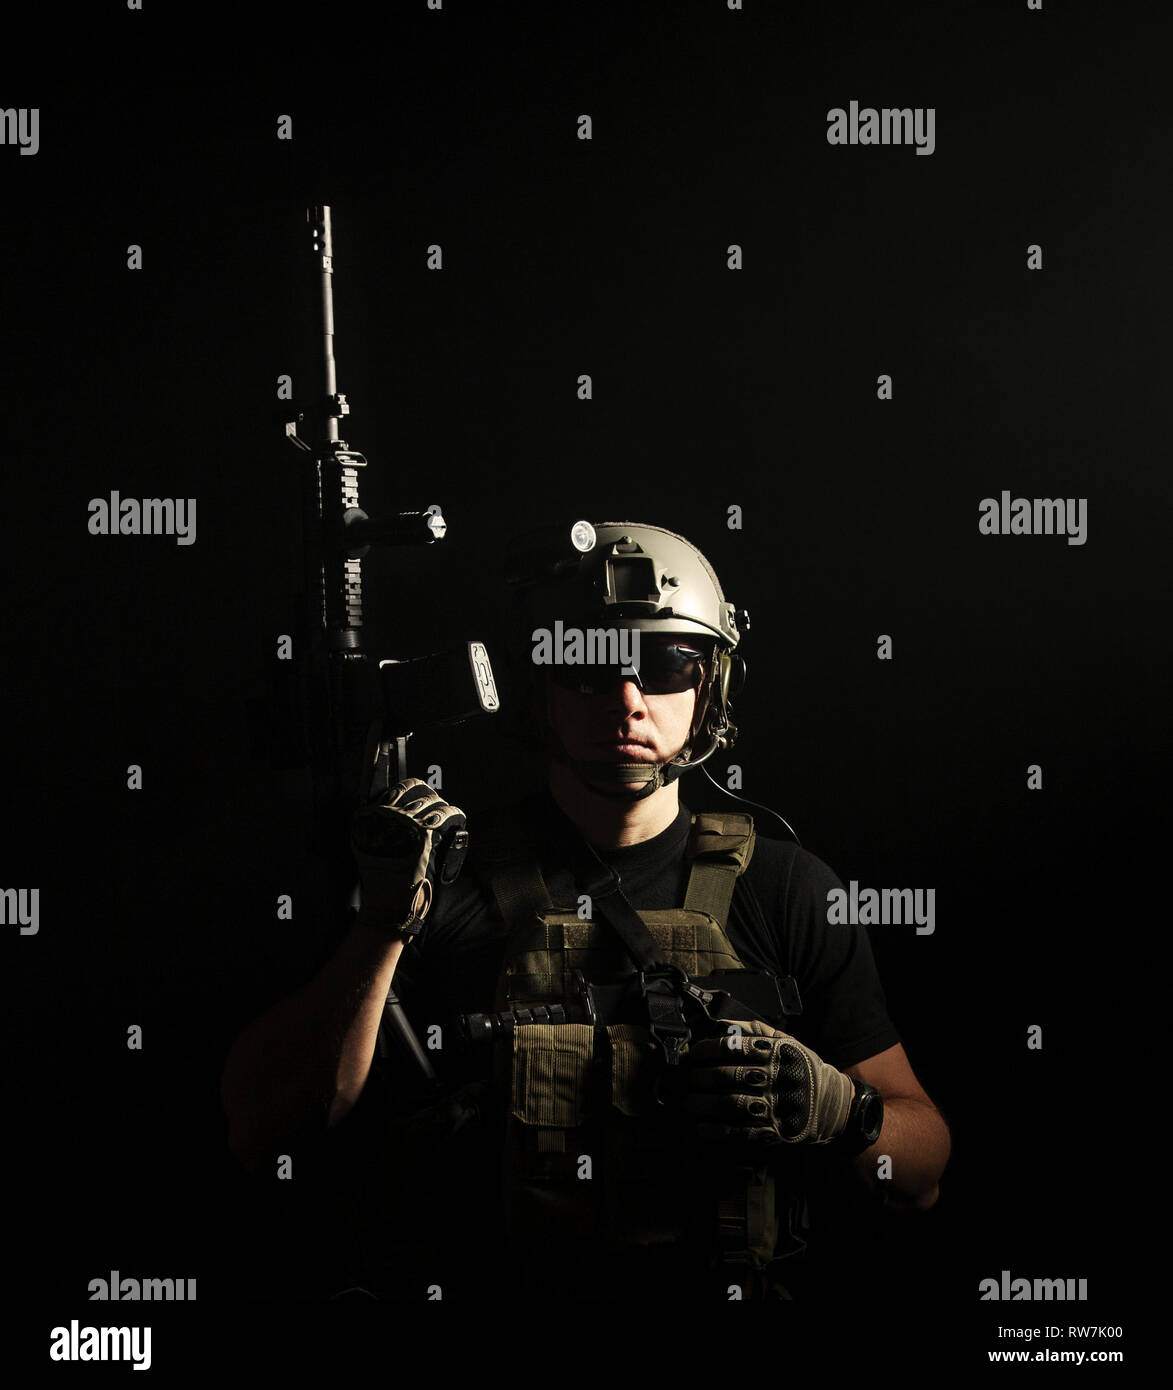 Private military contractor PMC with assault rifle on dark background. Stock Photo